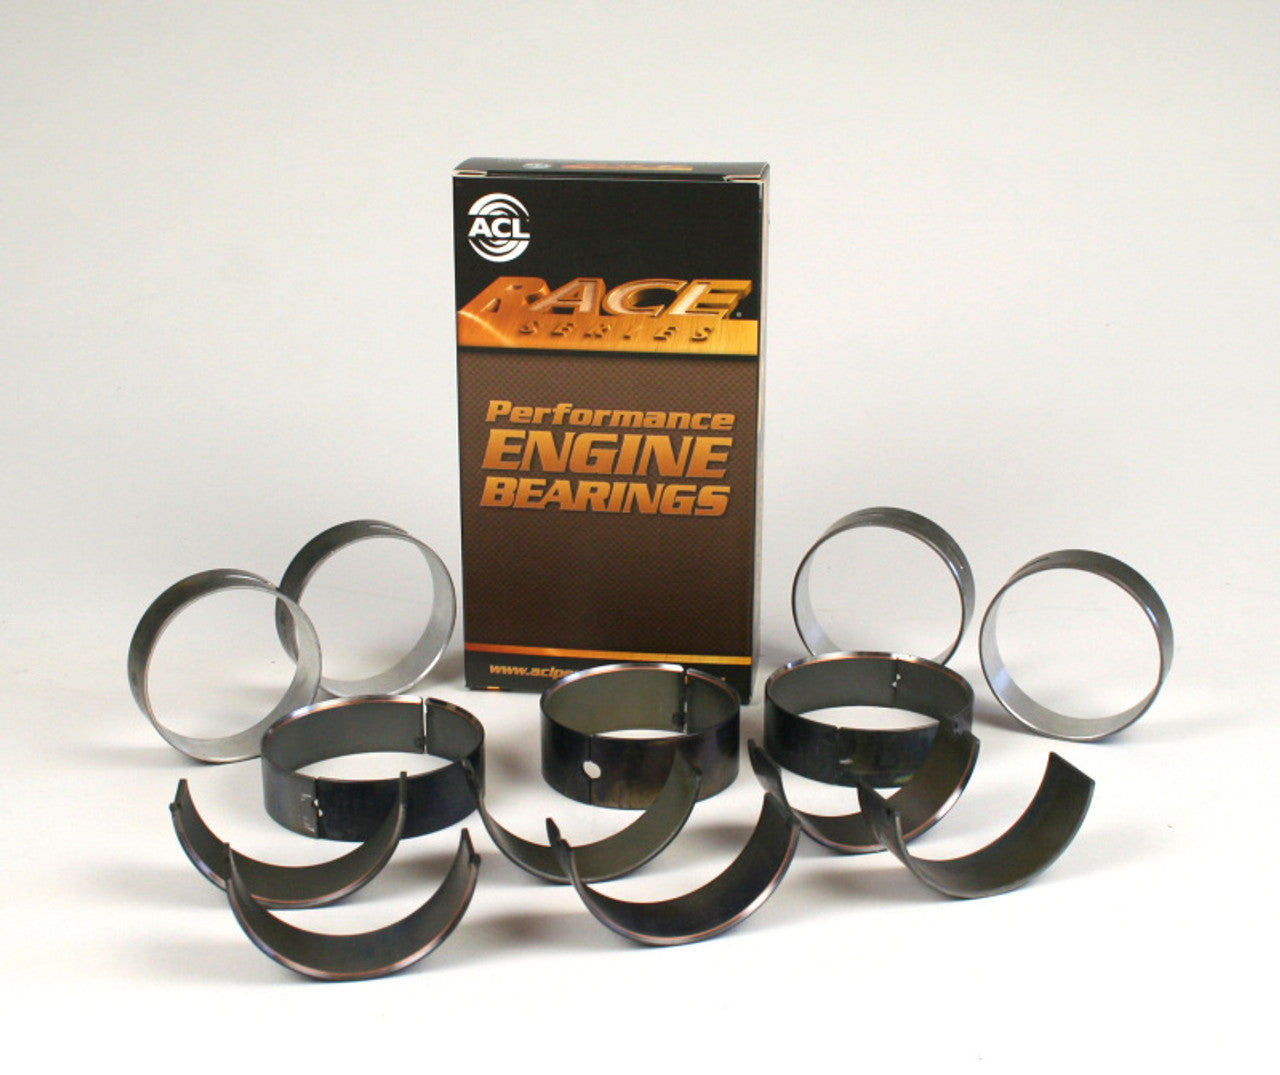 ACL 5M7298HC-10 - Chevy V8 4.8/5.3/5.7/6.0L Race Series .10 Oversized Main Bearing Set - CT-1 Coated